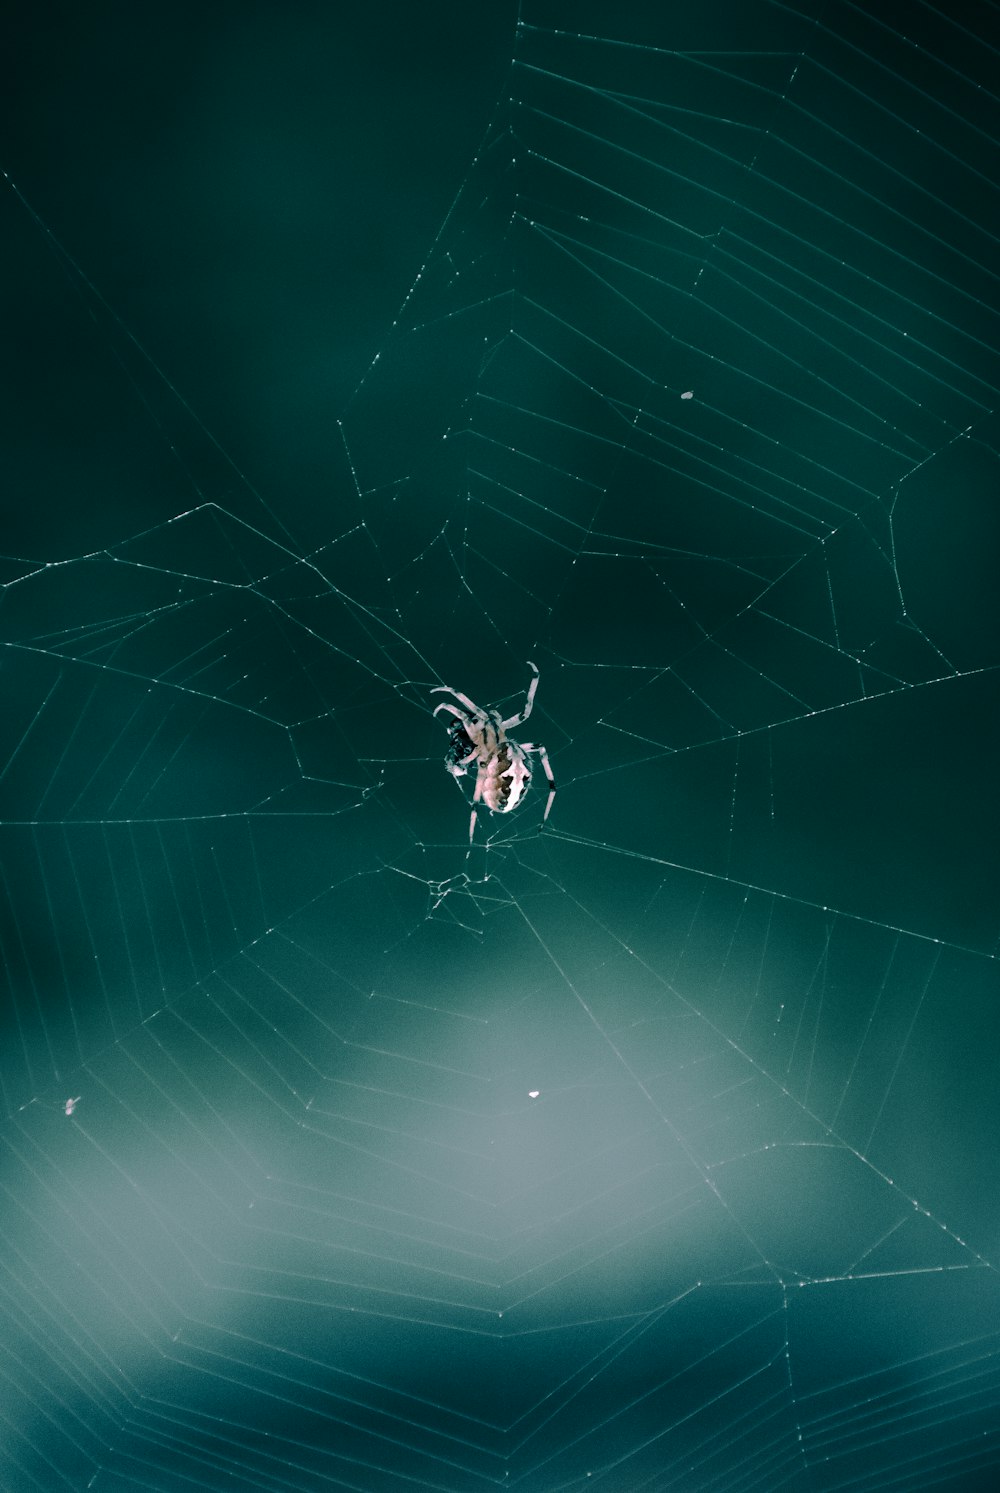 brown spider on spider web in close up photography